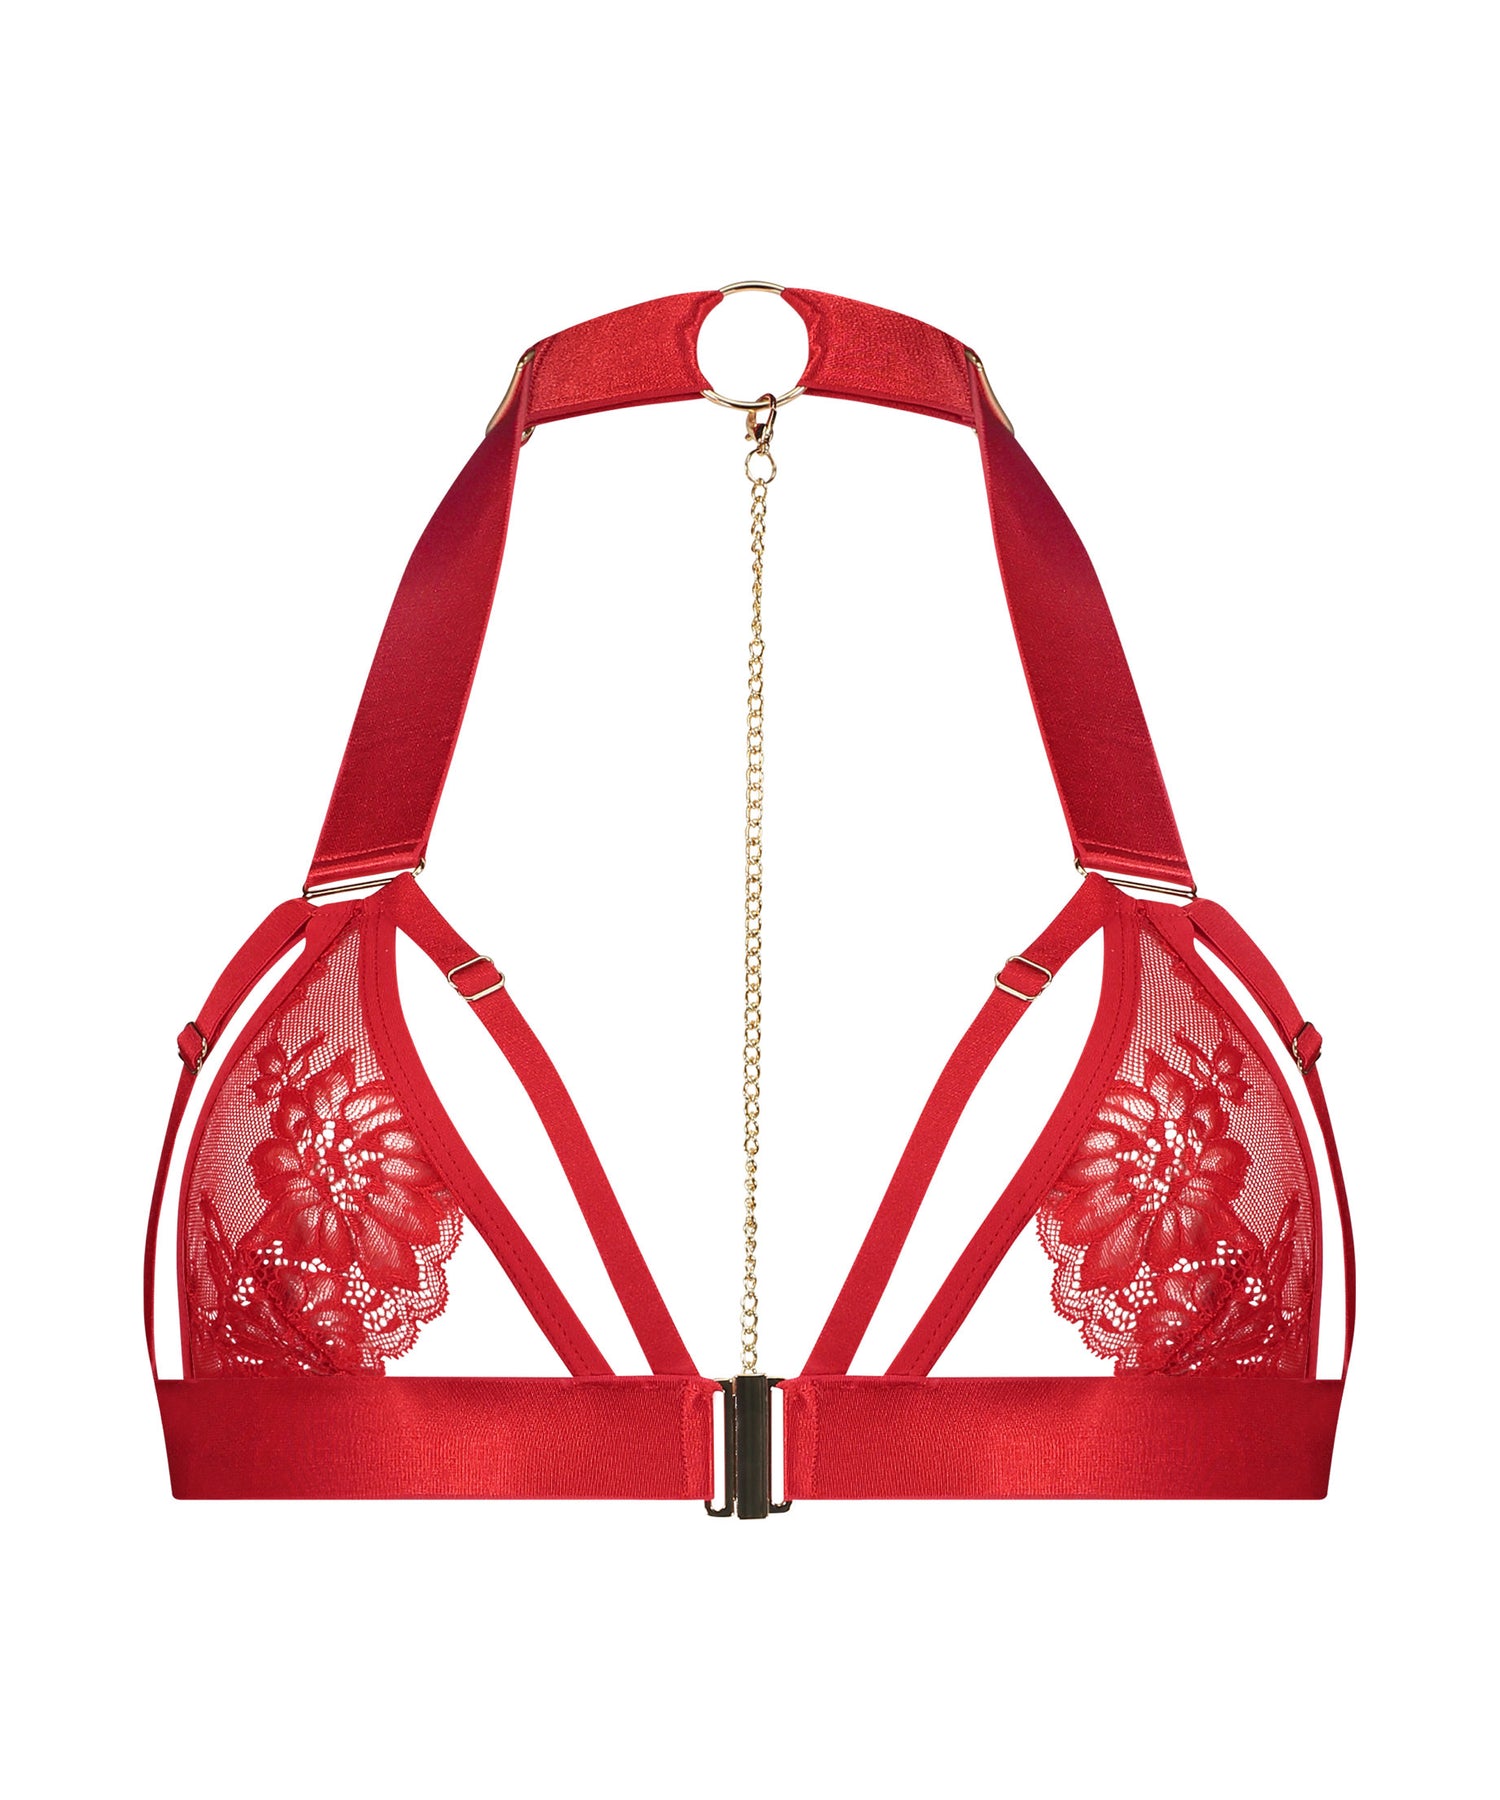 Clementine Bralette_204779_Tango Red_01